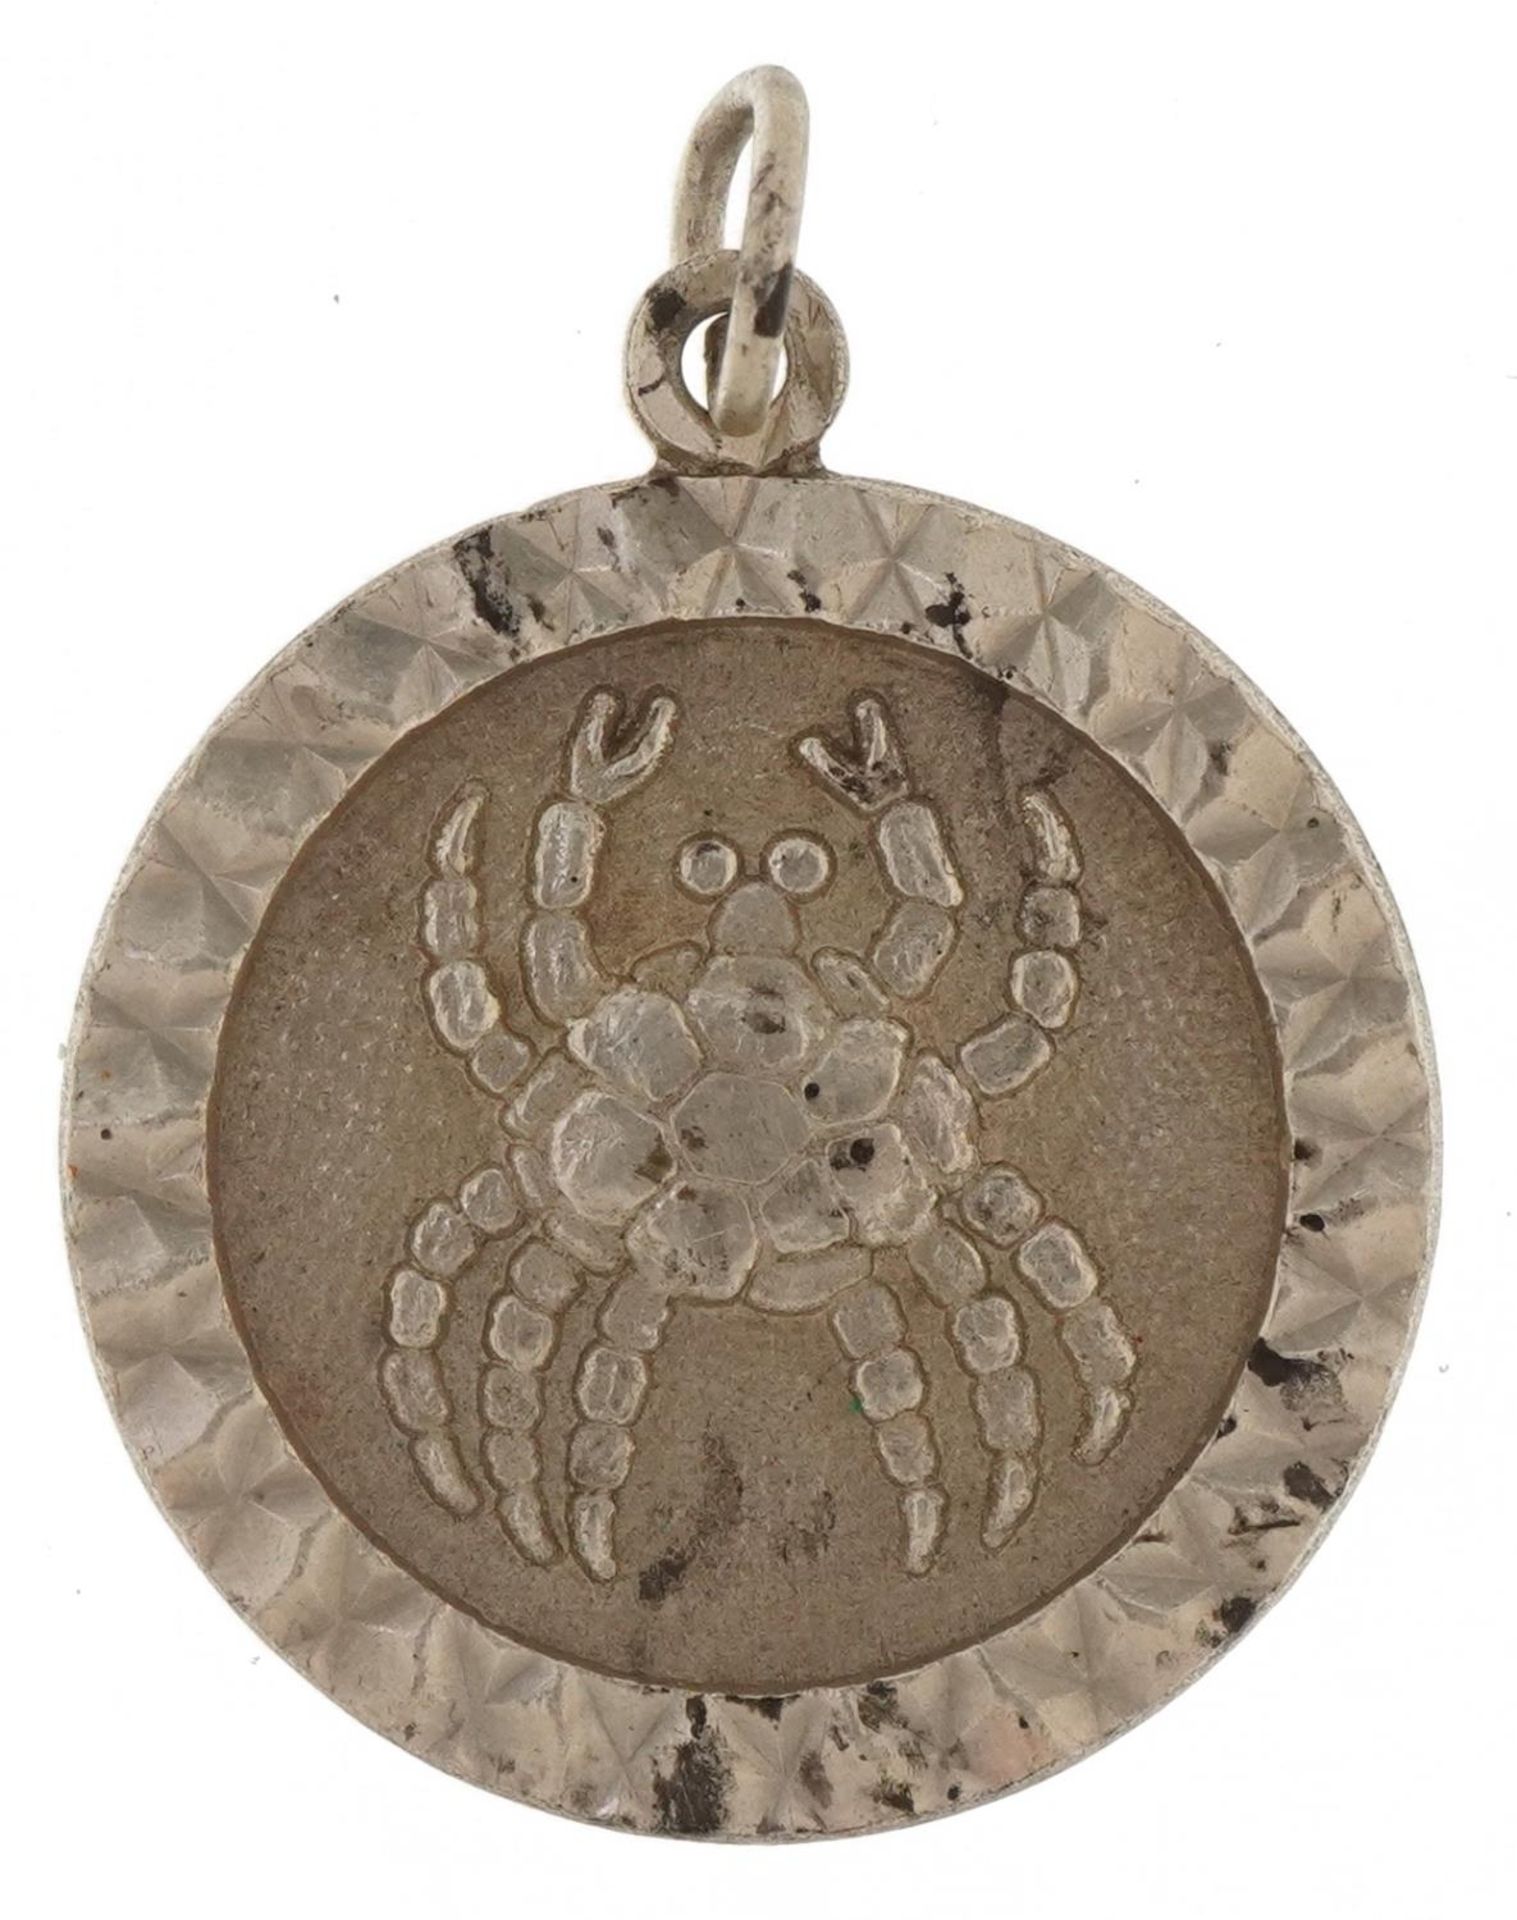 Silver zodiac Cancer symbol pendant, 2.3cm high, 3.7g : For further information on this lot please